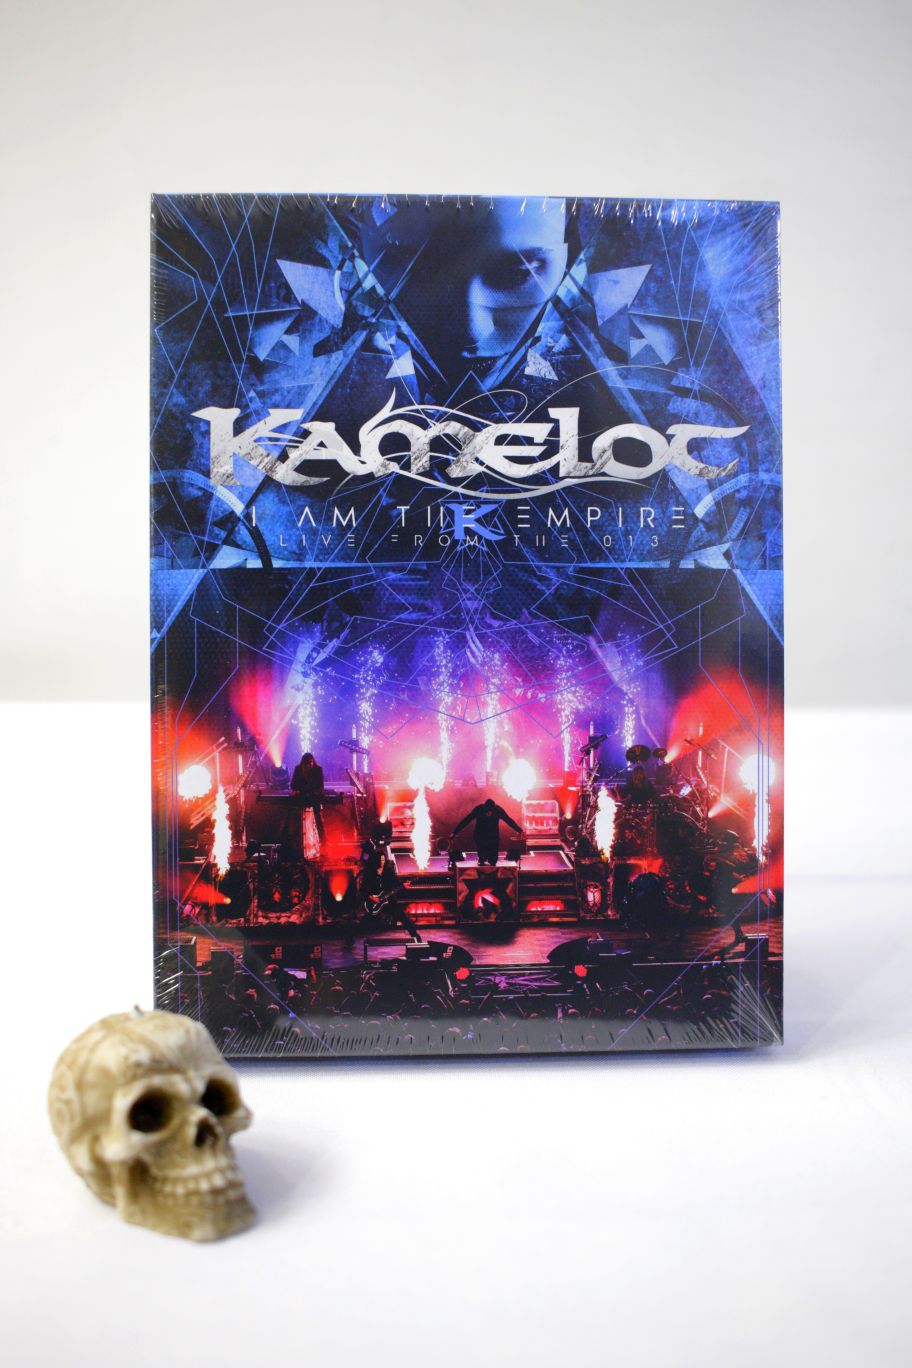 CD KAMELOT I AM THE EMPIRE LIVE FROM THE 013